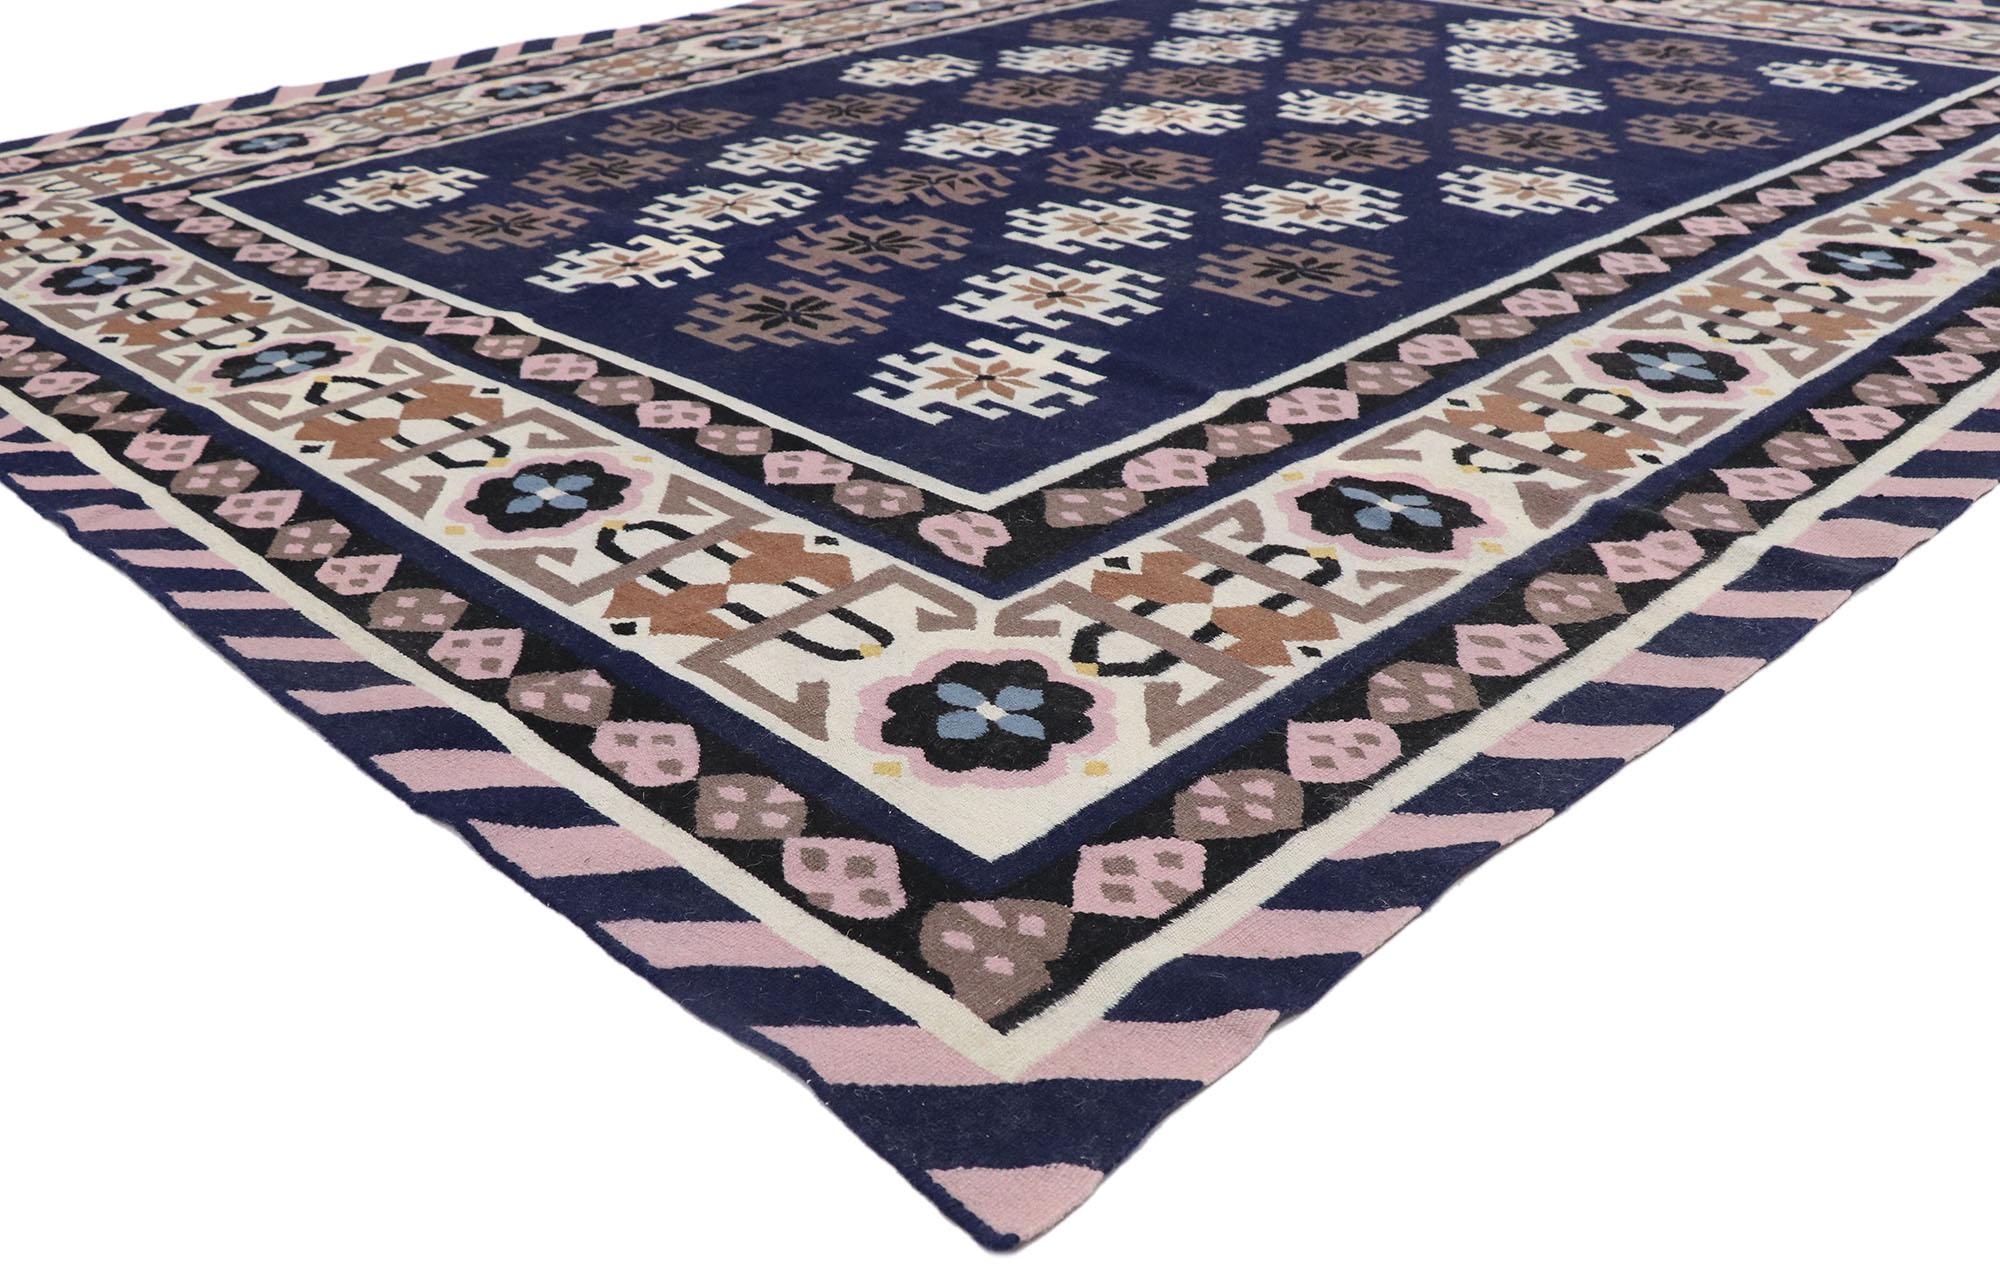 78021 Vintage Romanian Geometric Kilim rug with Modern Style 08'02 x 10'00. Showcasing a bold expressive design, incredible detail and texture, this hand woven wool vintage Romanian kilim rug is a captivating vision of woven beauty. The abrashed